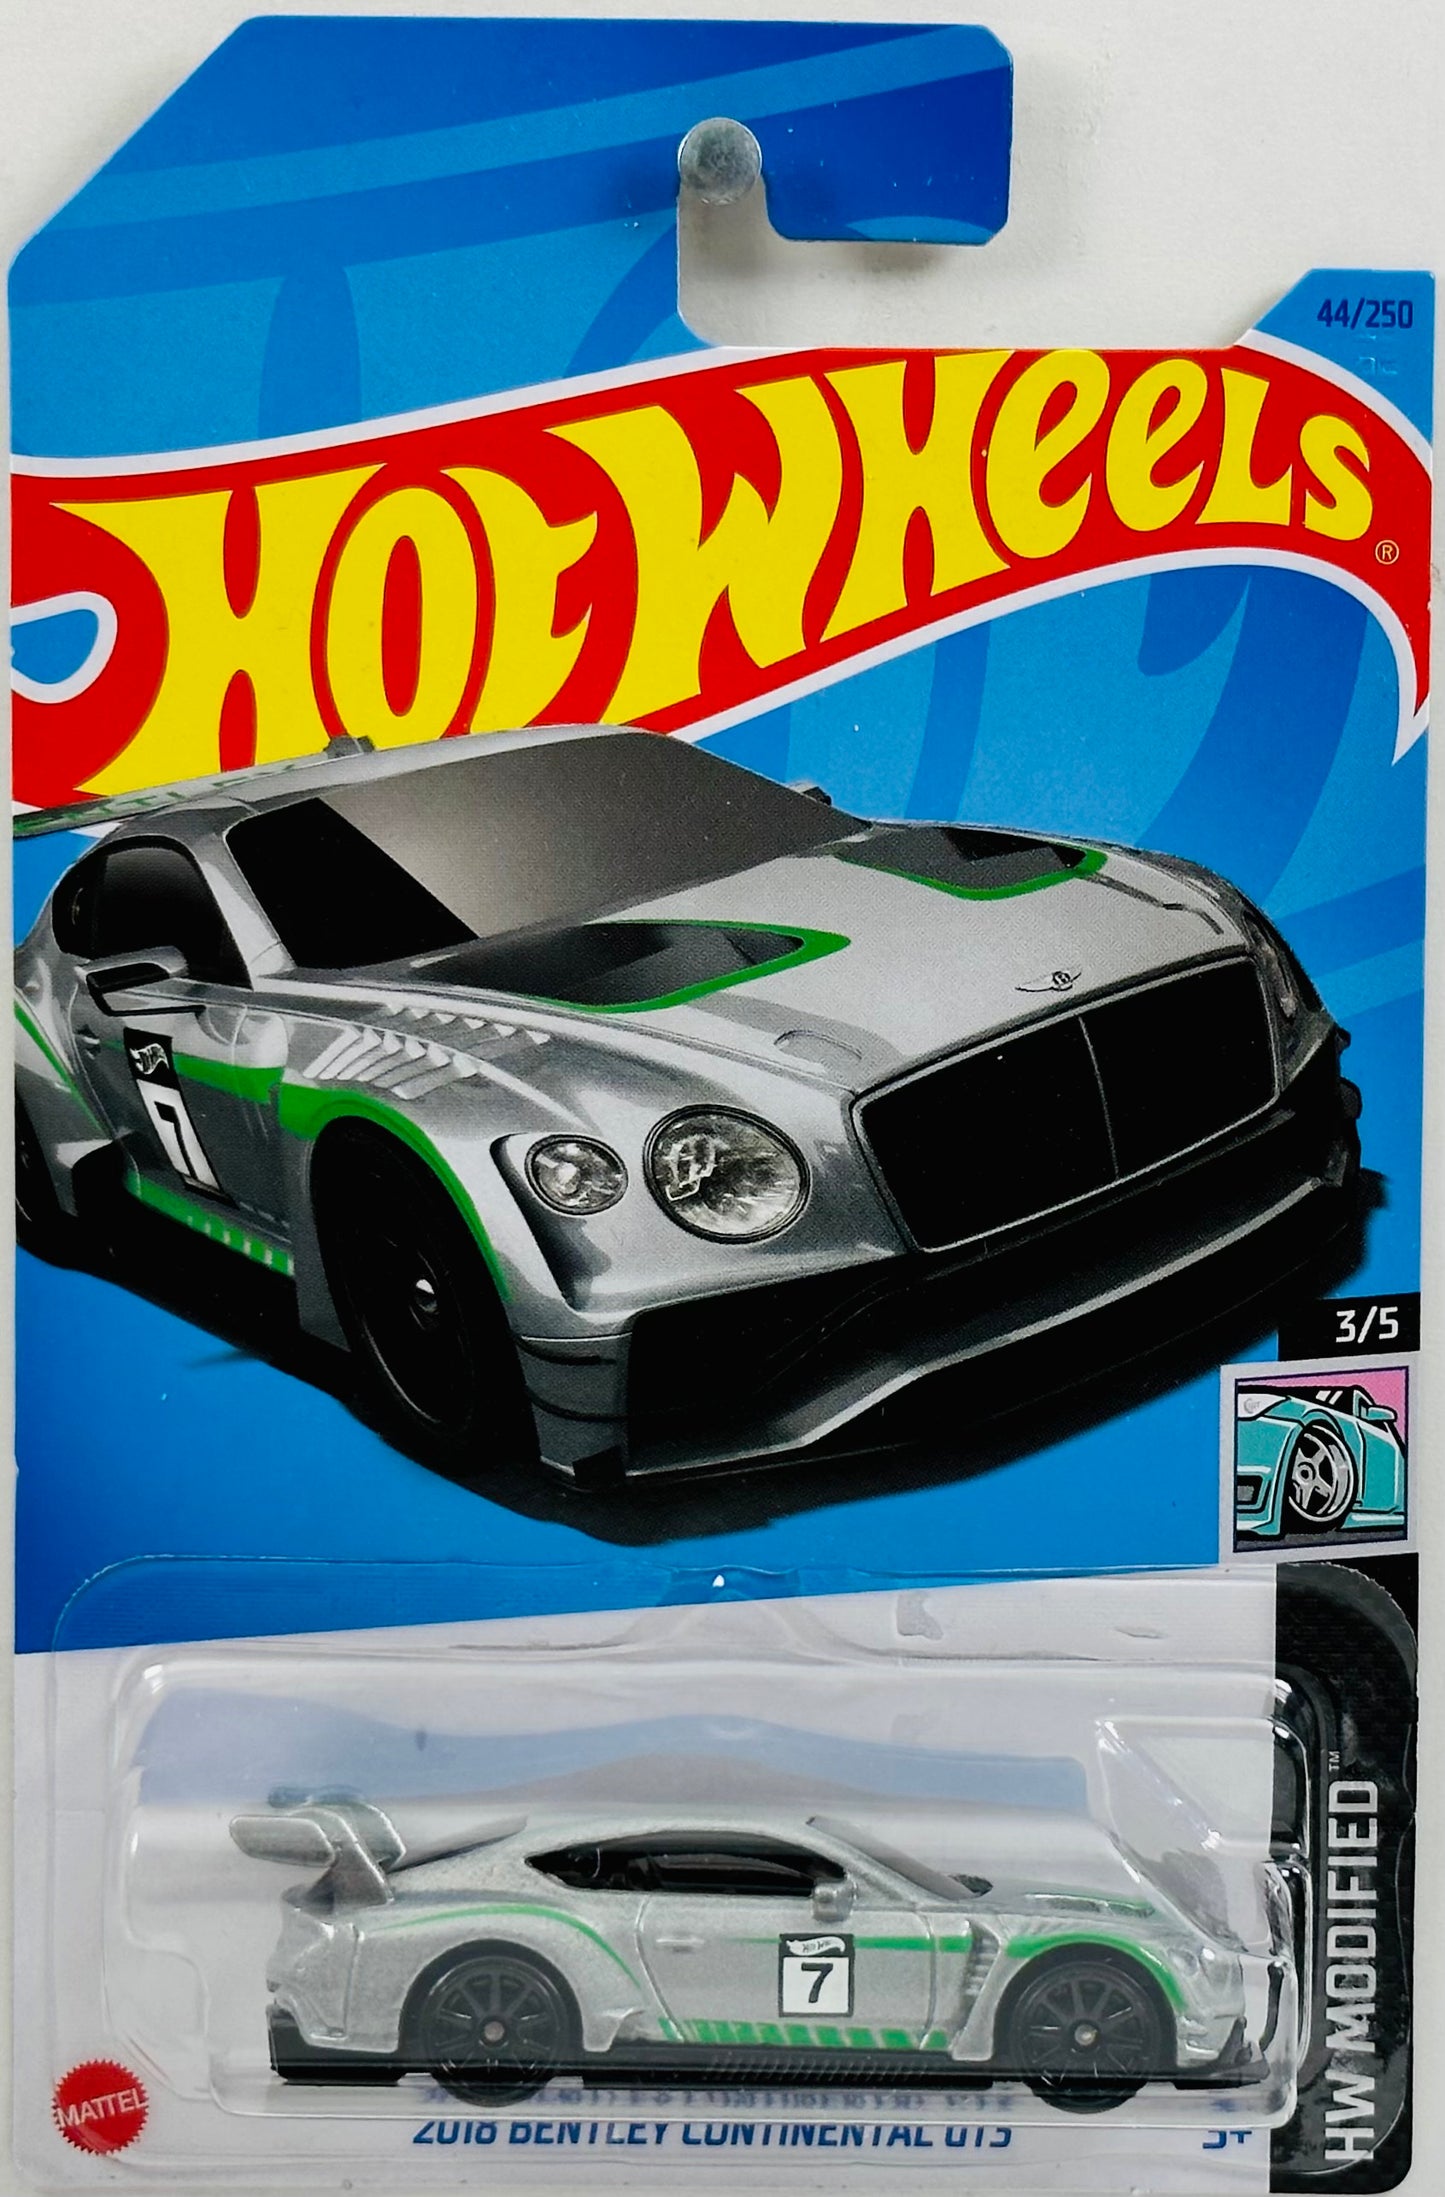 Hot Wheels 2023 - Collector # 044/250 - HW Modified 3/5 - 2018 Bentley Continental GT3 - Grey - Green Stripes / Hot Wheels "7" Graphics - IC